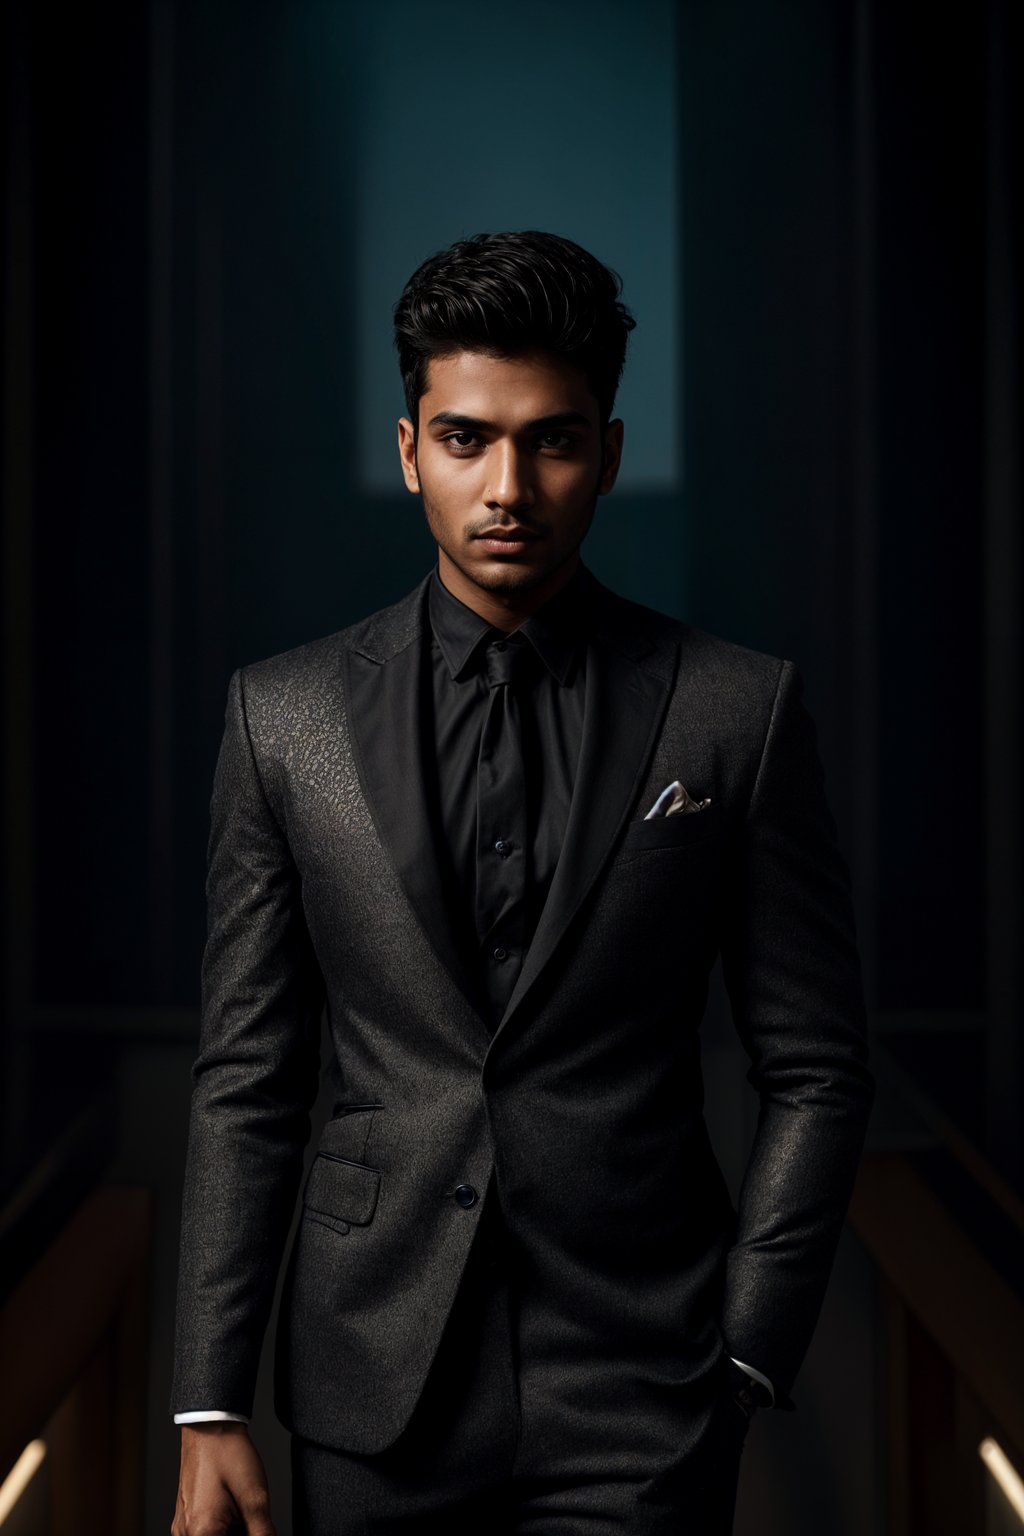 man with enticing gaze, adorned with  sharp, stylish suit against a twilight backdrop